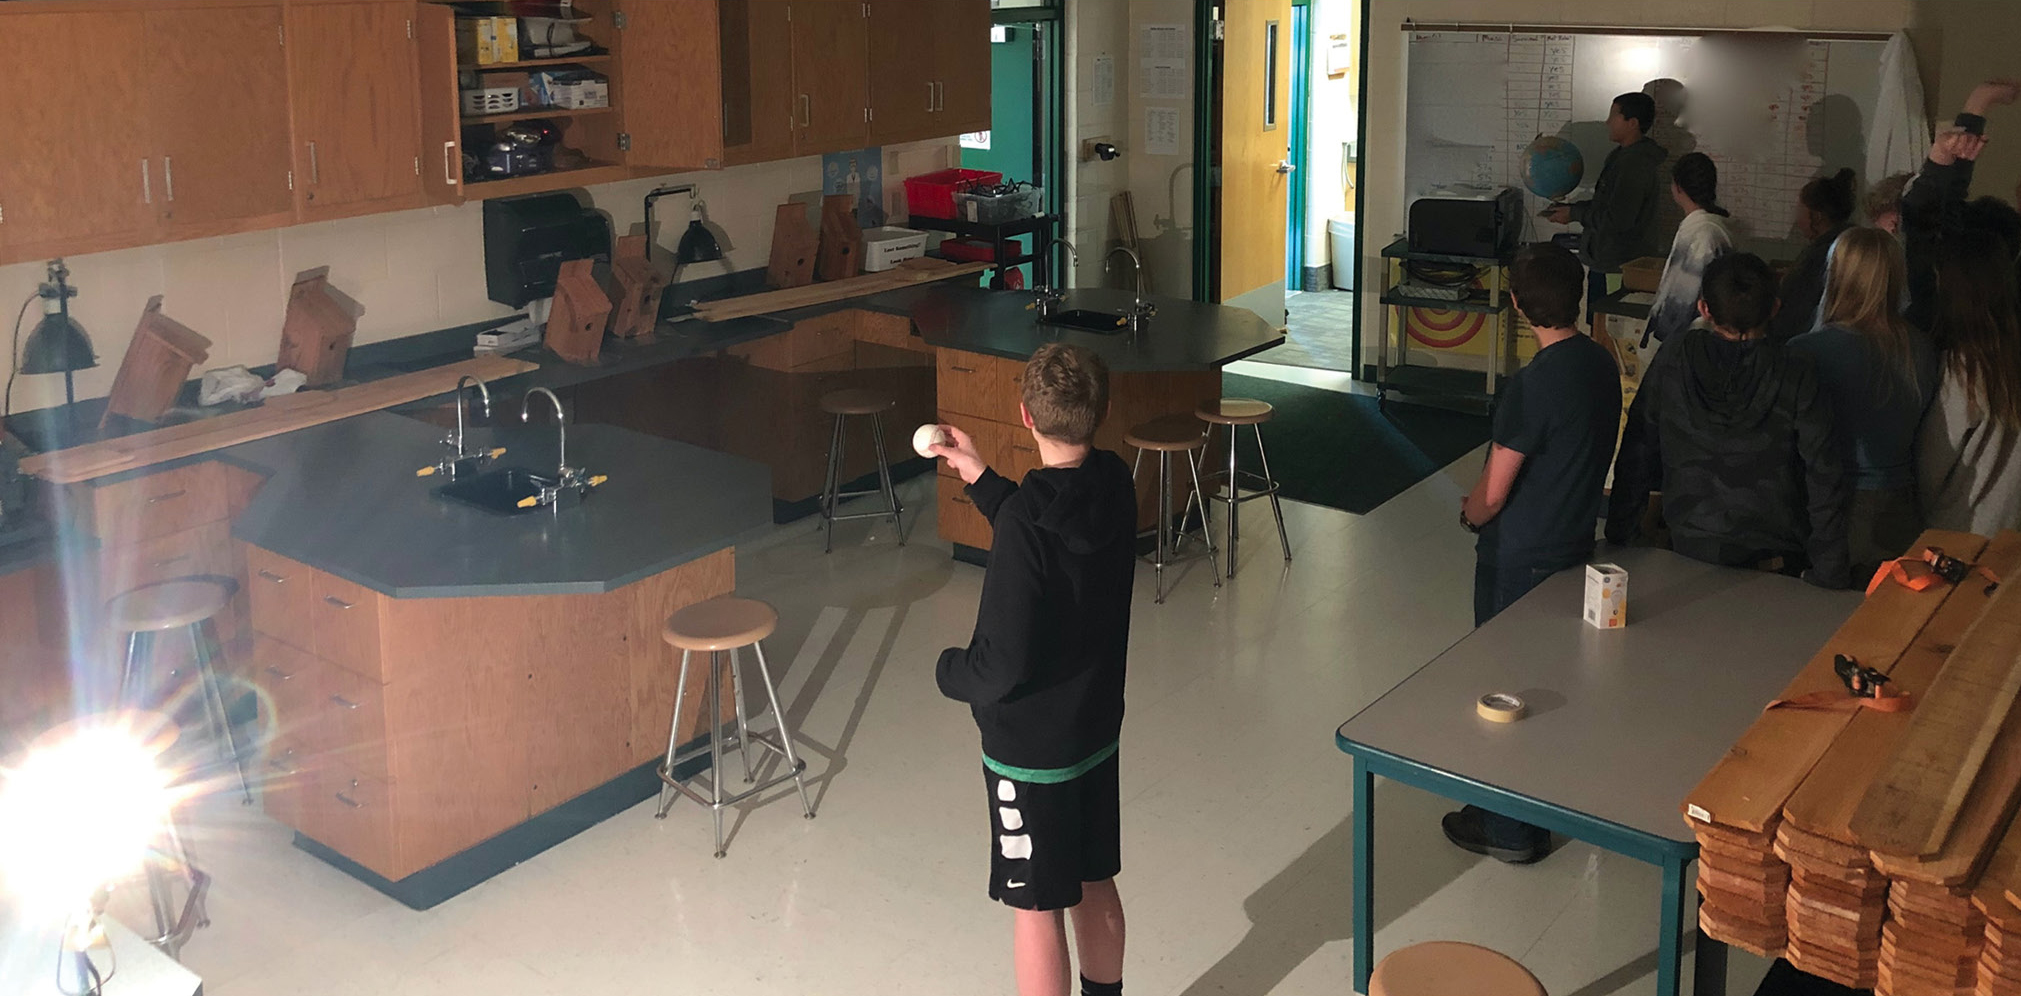 |	FIGURE 2: Students modeling eclipses in their classroom. 